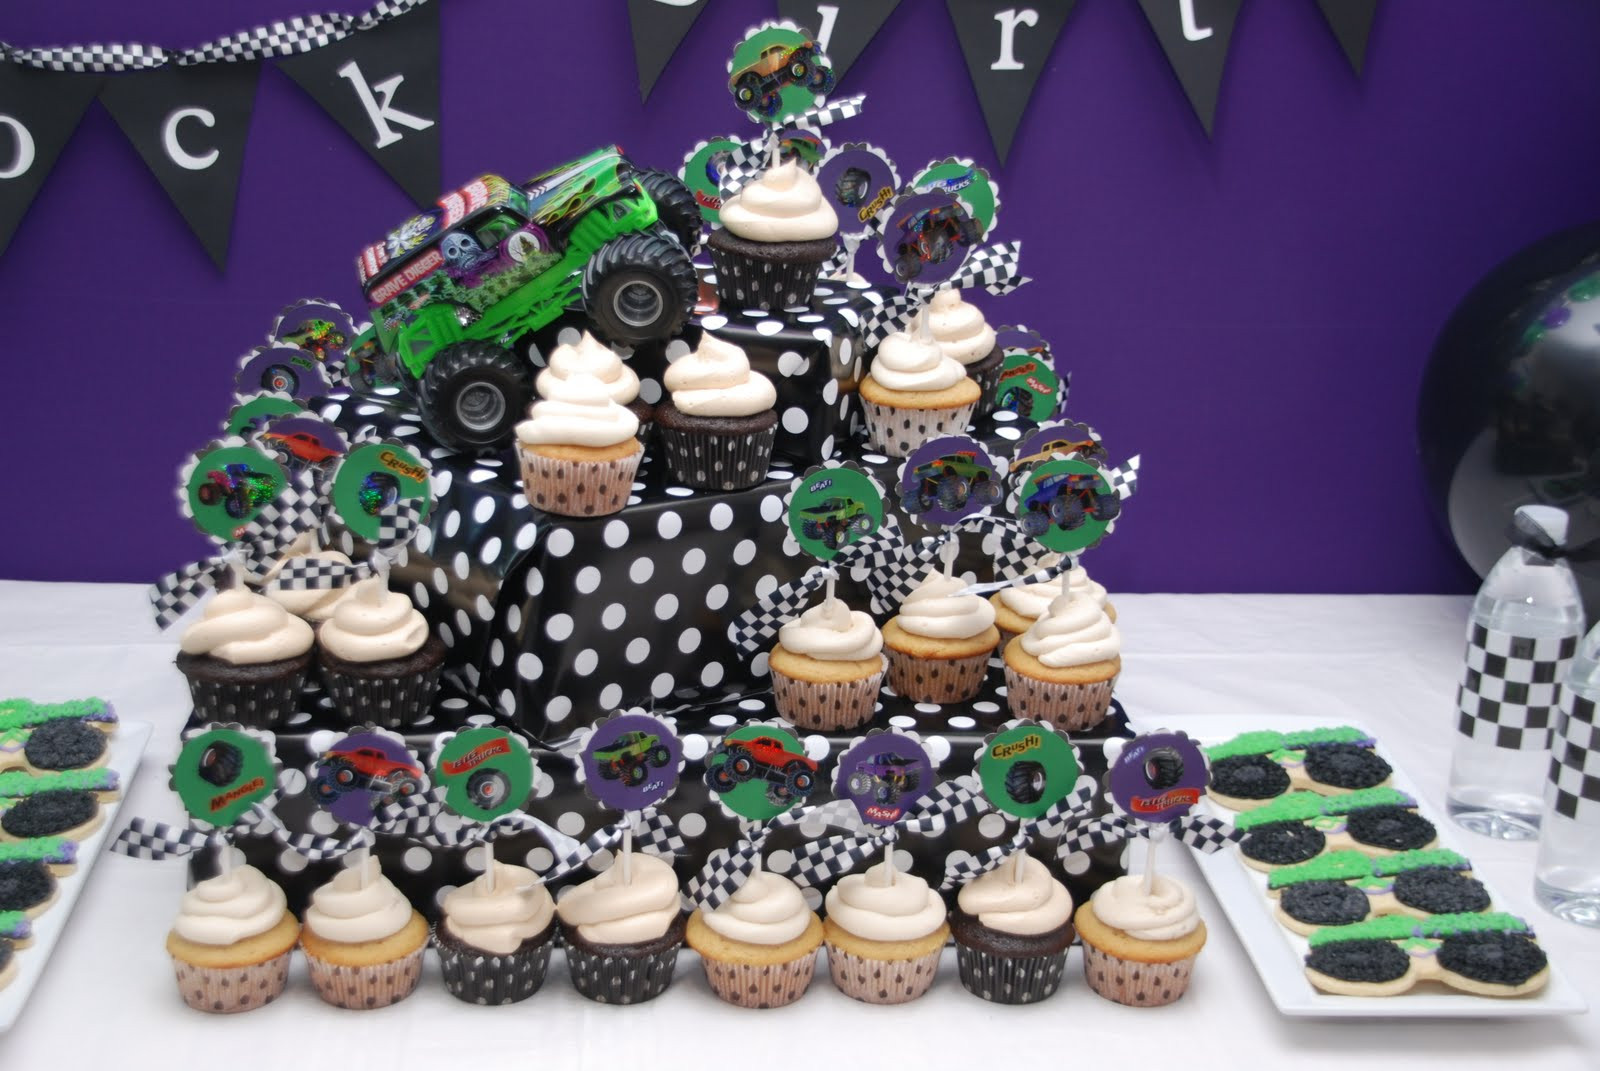 Monster Truck Birthday Decorations
 Pirates & Princesses Brock s Monster Truck 4th Birthday Party